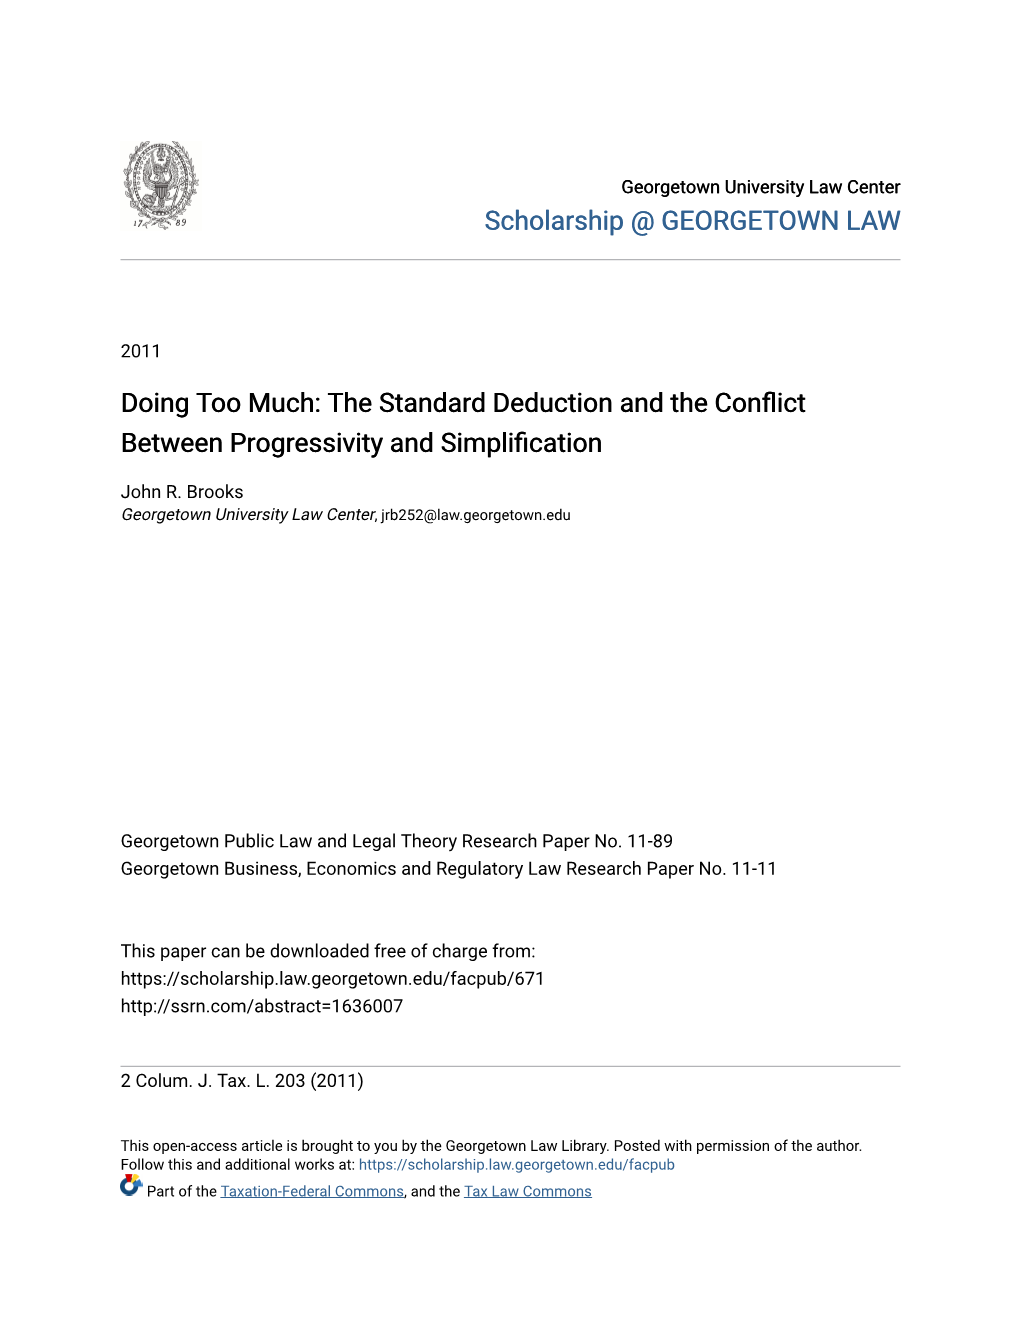 Doing Too Much: the Standard Deduction and the Conflict Between Progressivity and Simplification